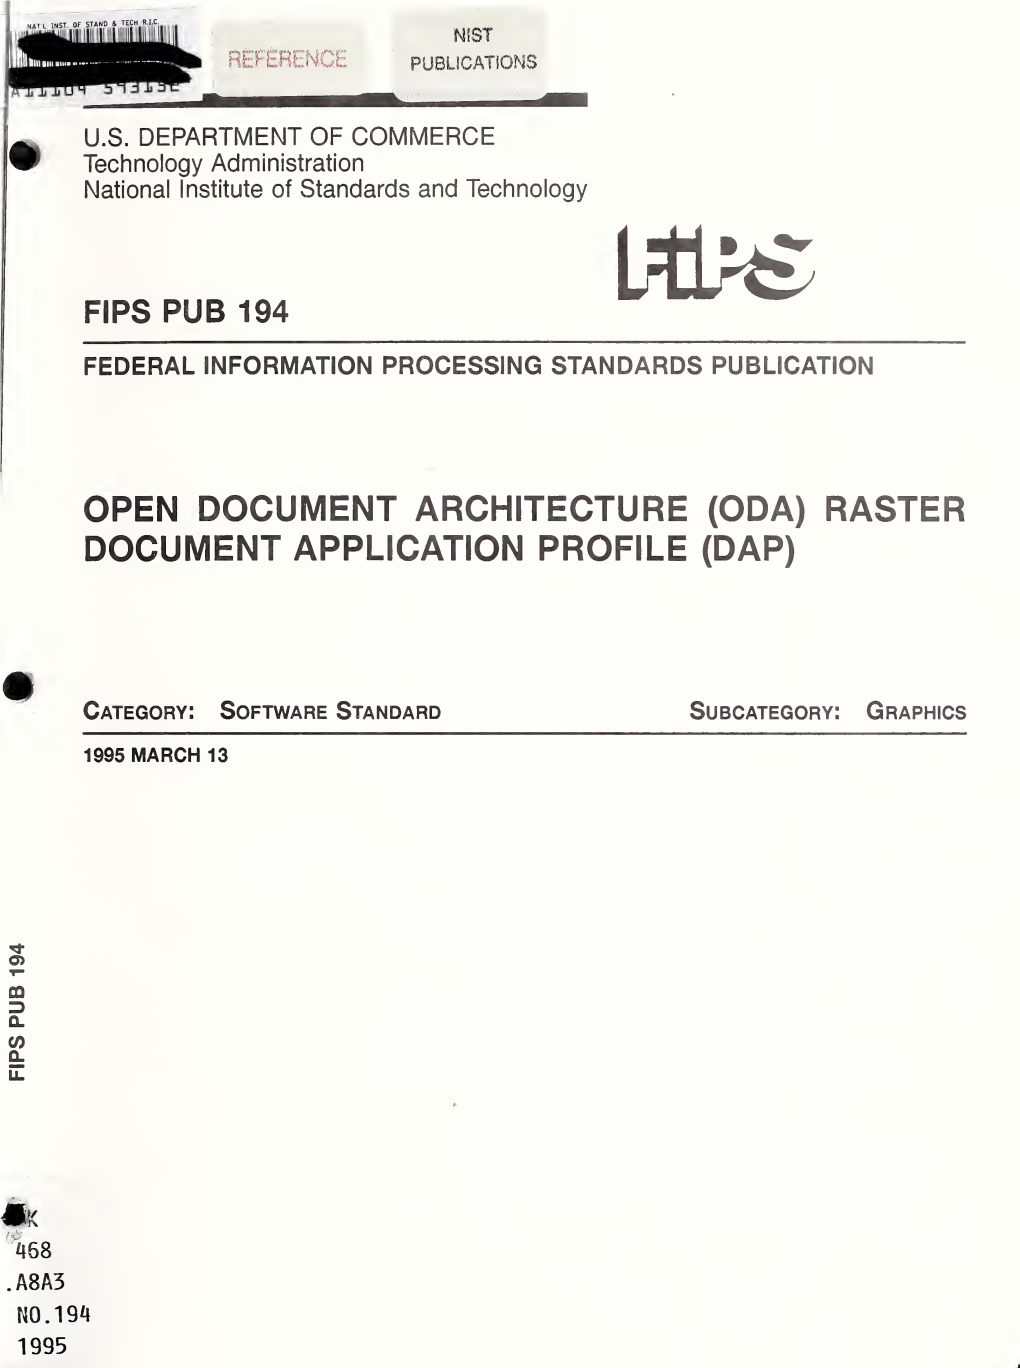 Federal Information Processing Standards Publication: Open